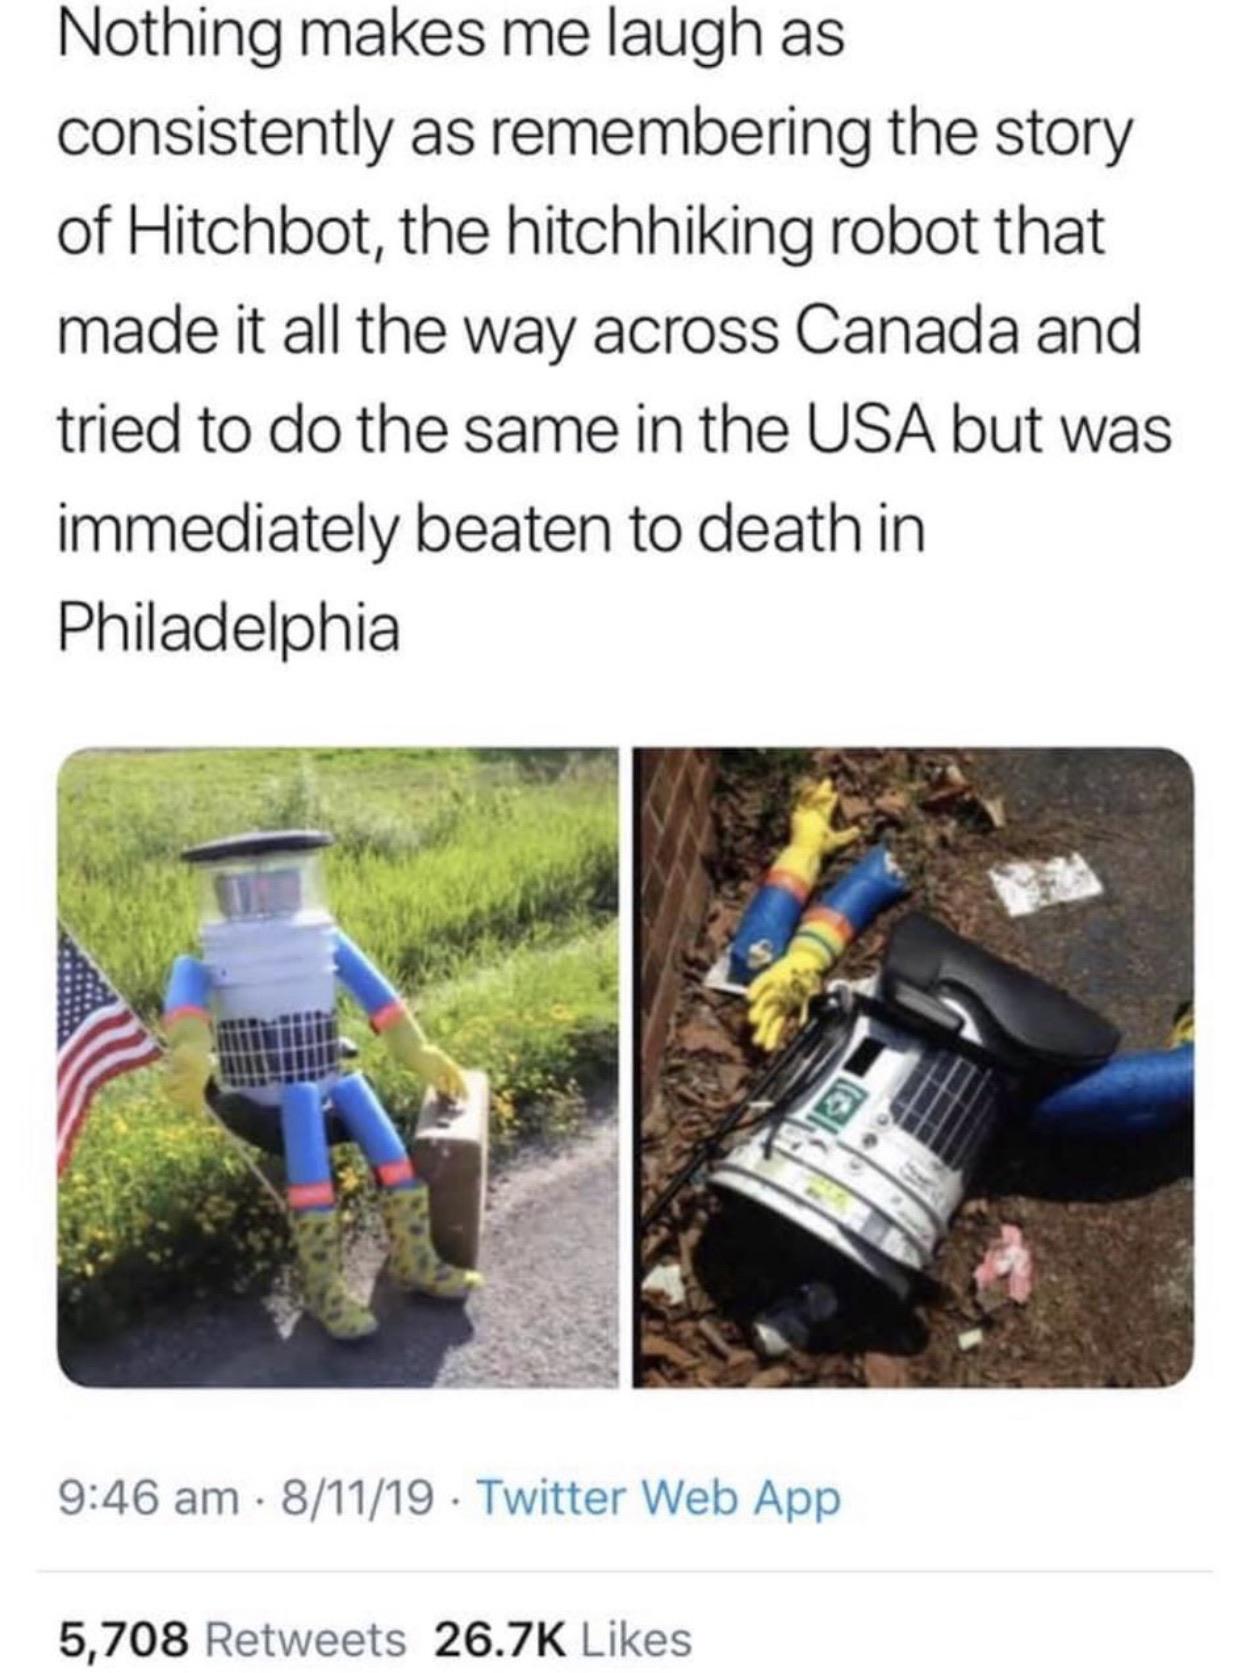 water - Nothing makes me laugh as consistently as remembering the story of Hitchbot, the hitchhiking robot that made it all the way across Canada and tried to do the same in the Usa but was immediately beaten to death in Philadelphia 81119 Twitter Web App